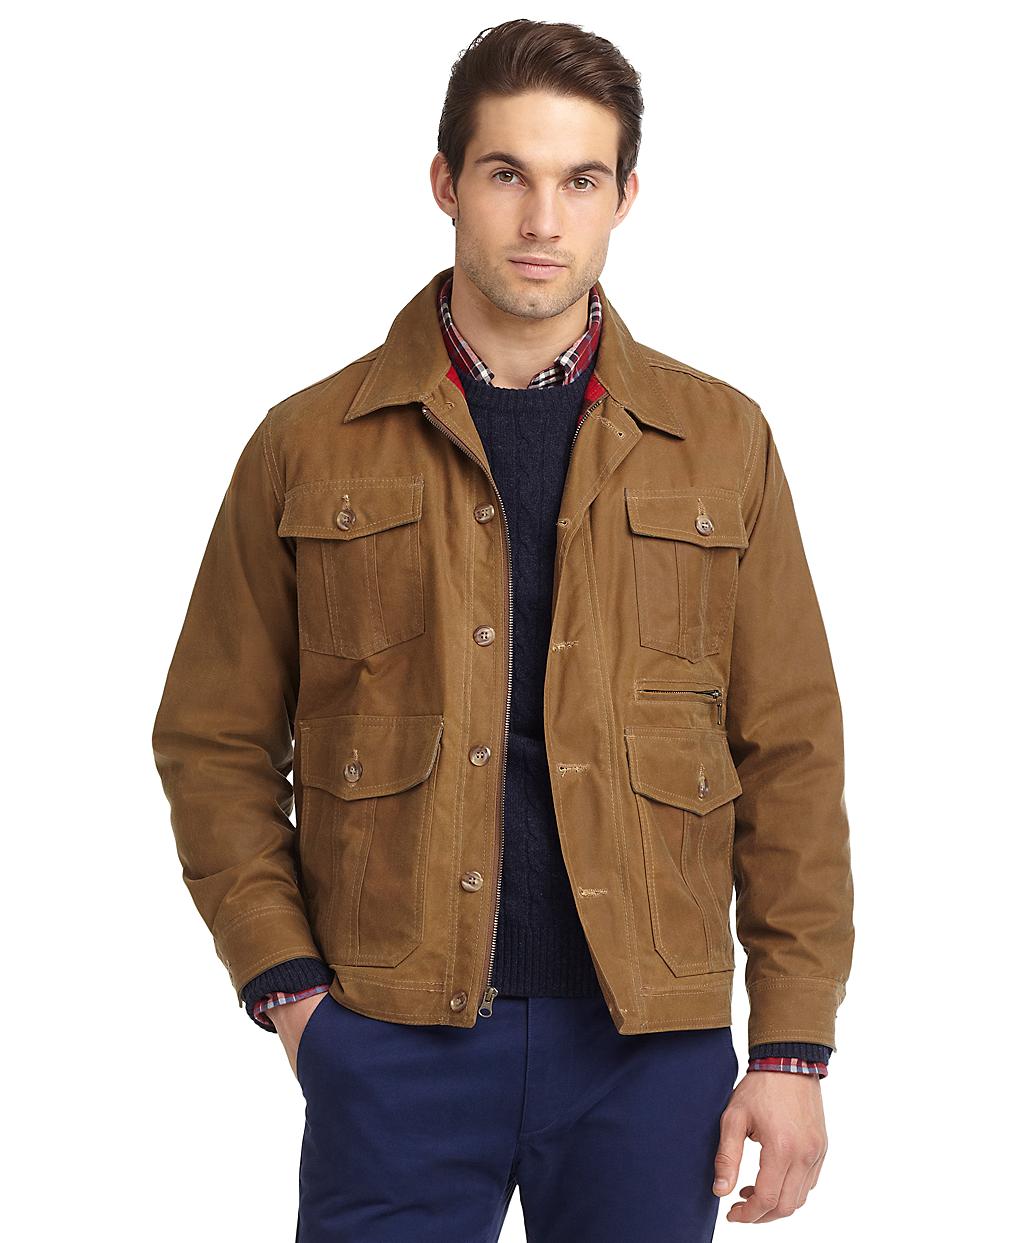 Lyst - Brooks Brothers Filson Westlake Waxed Jacket in Brown for Men